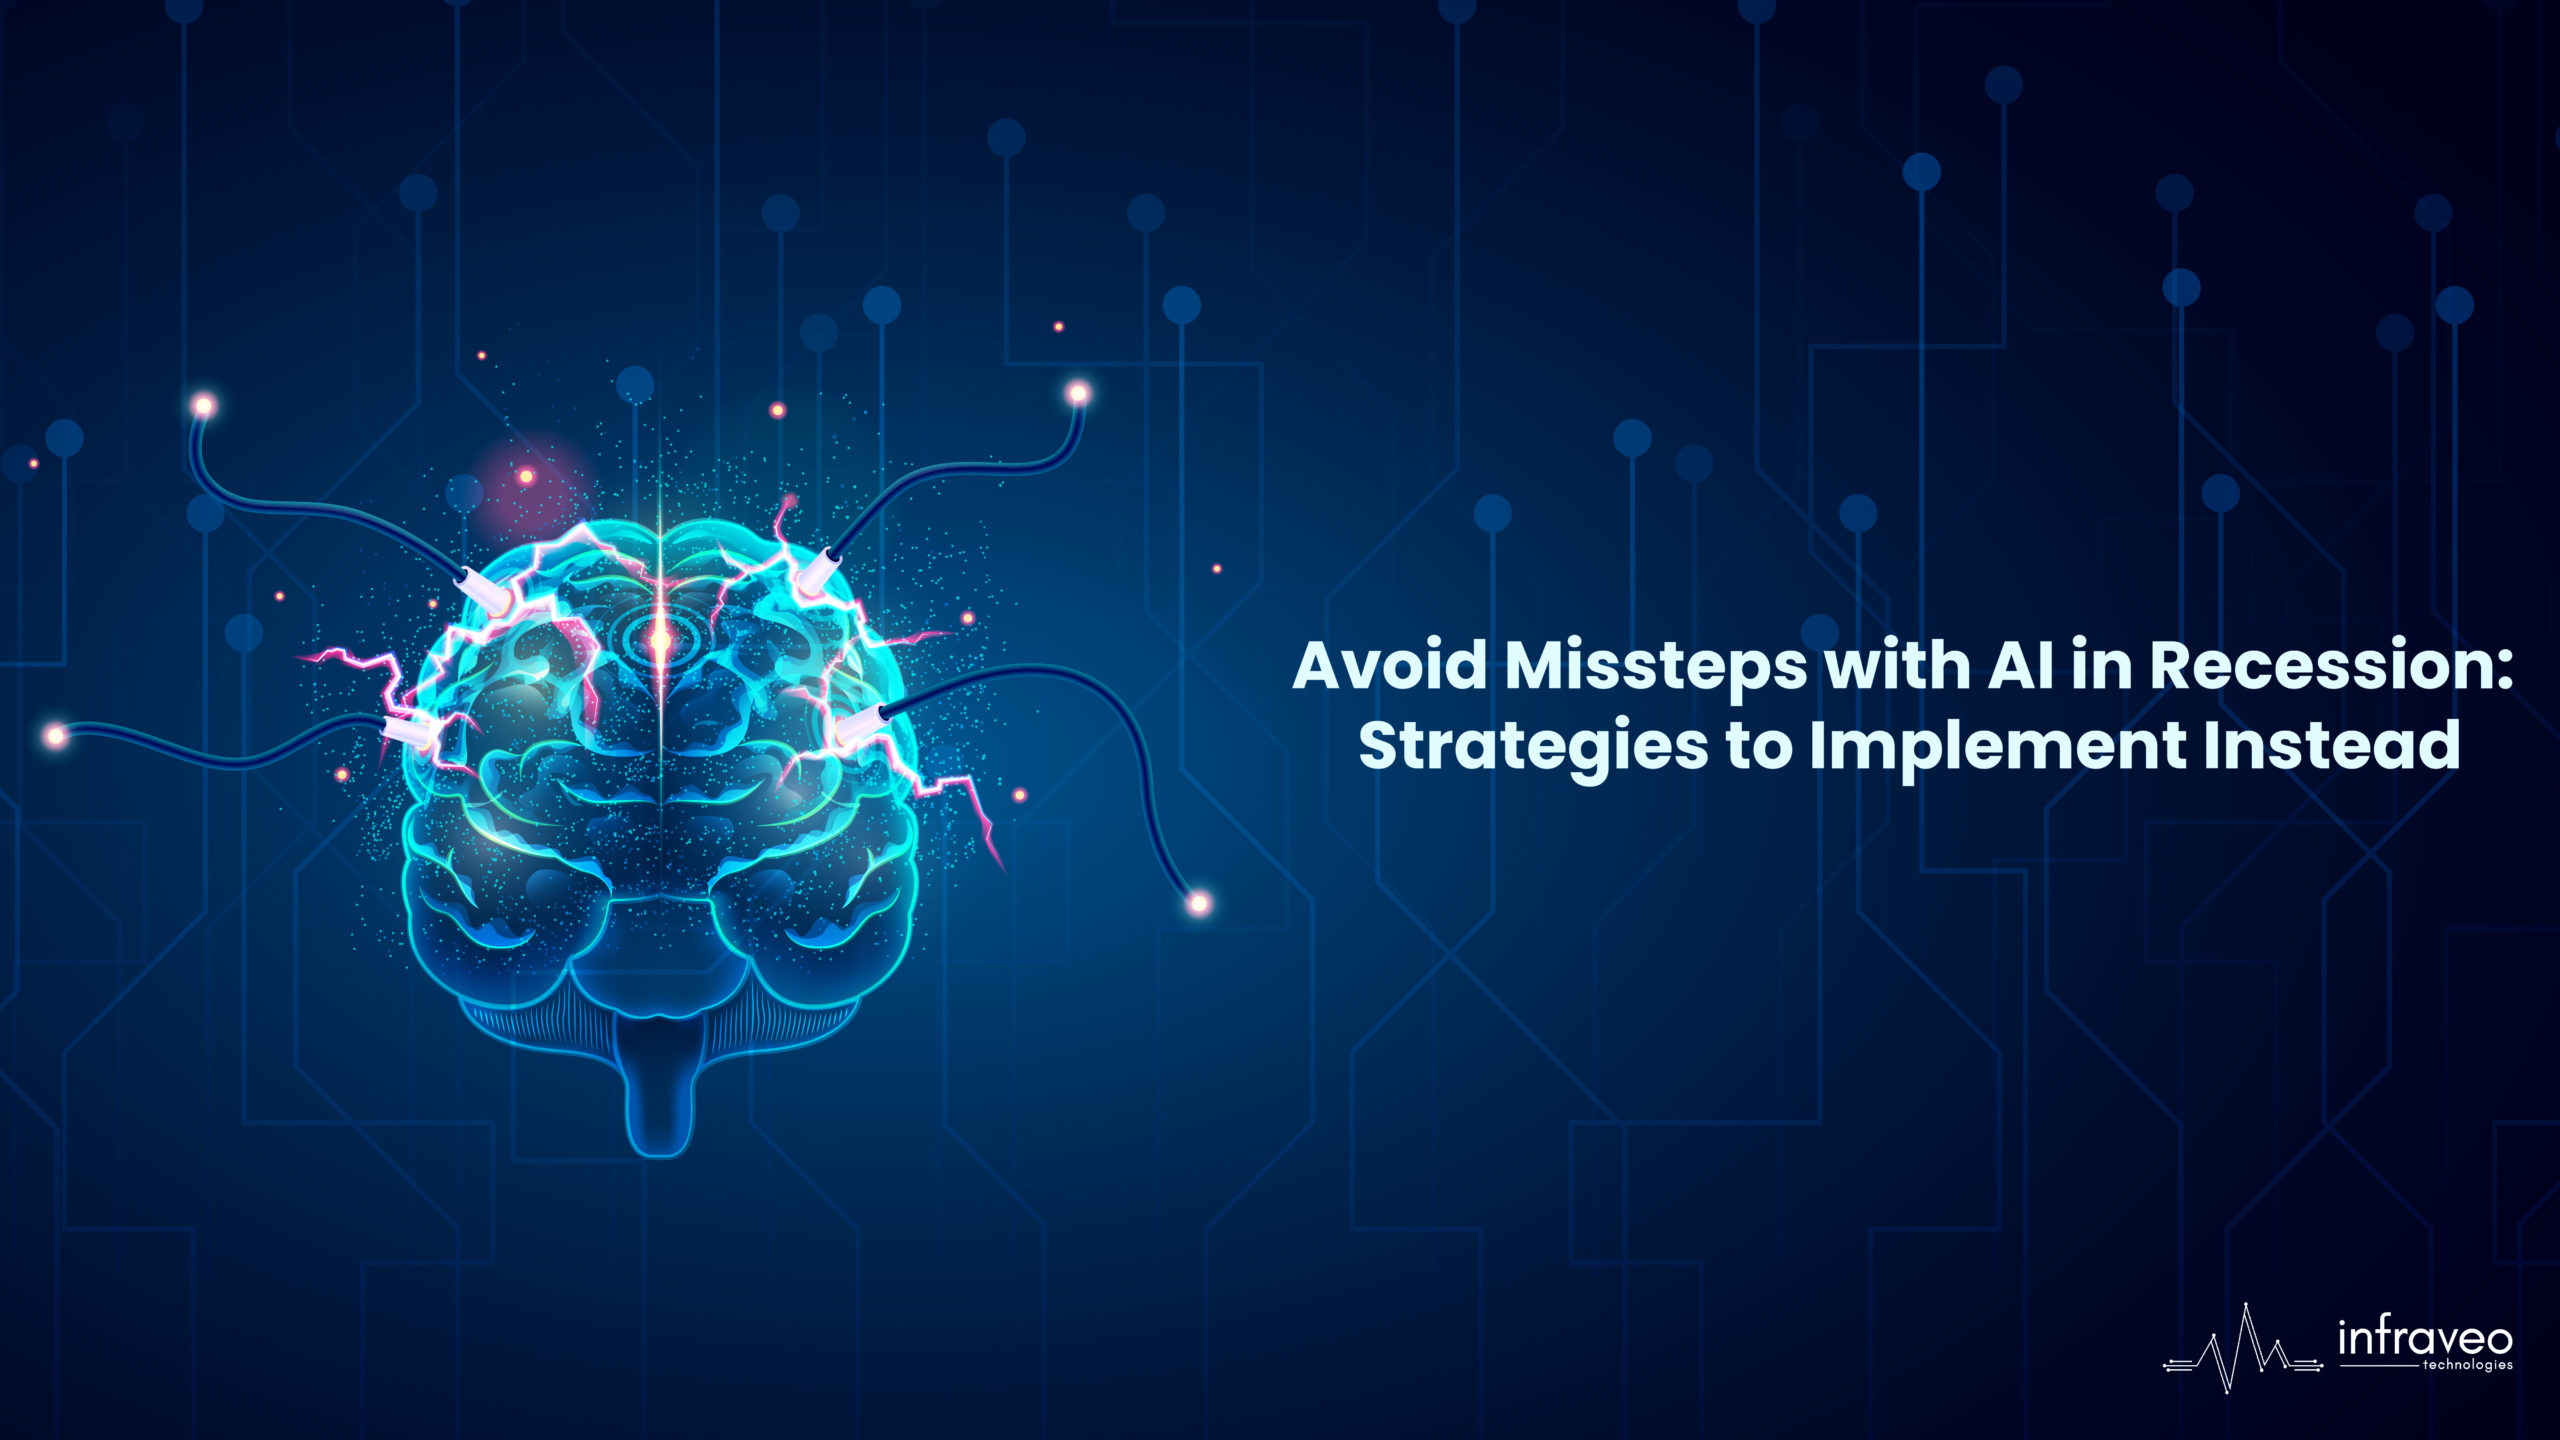 How to avoid mistakes in AI during recession